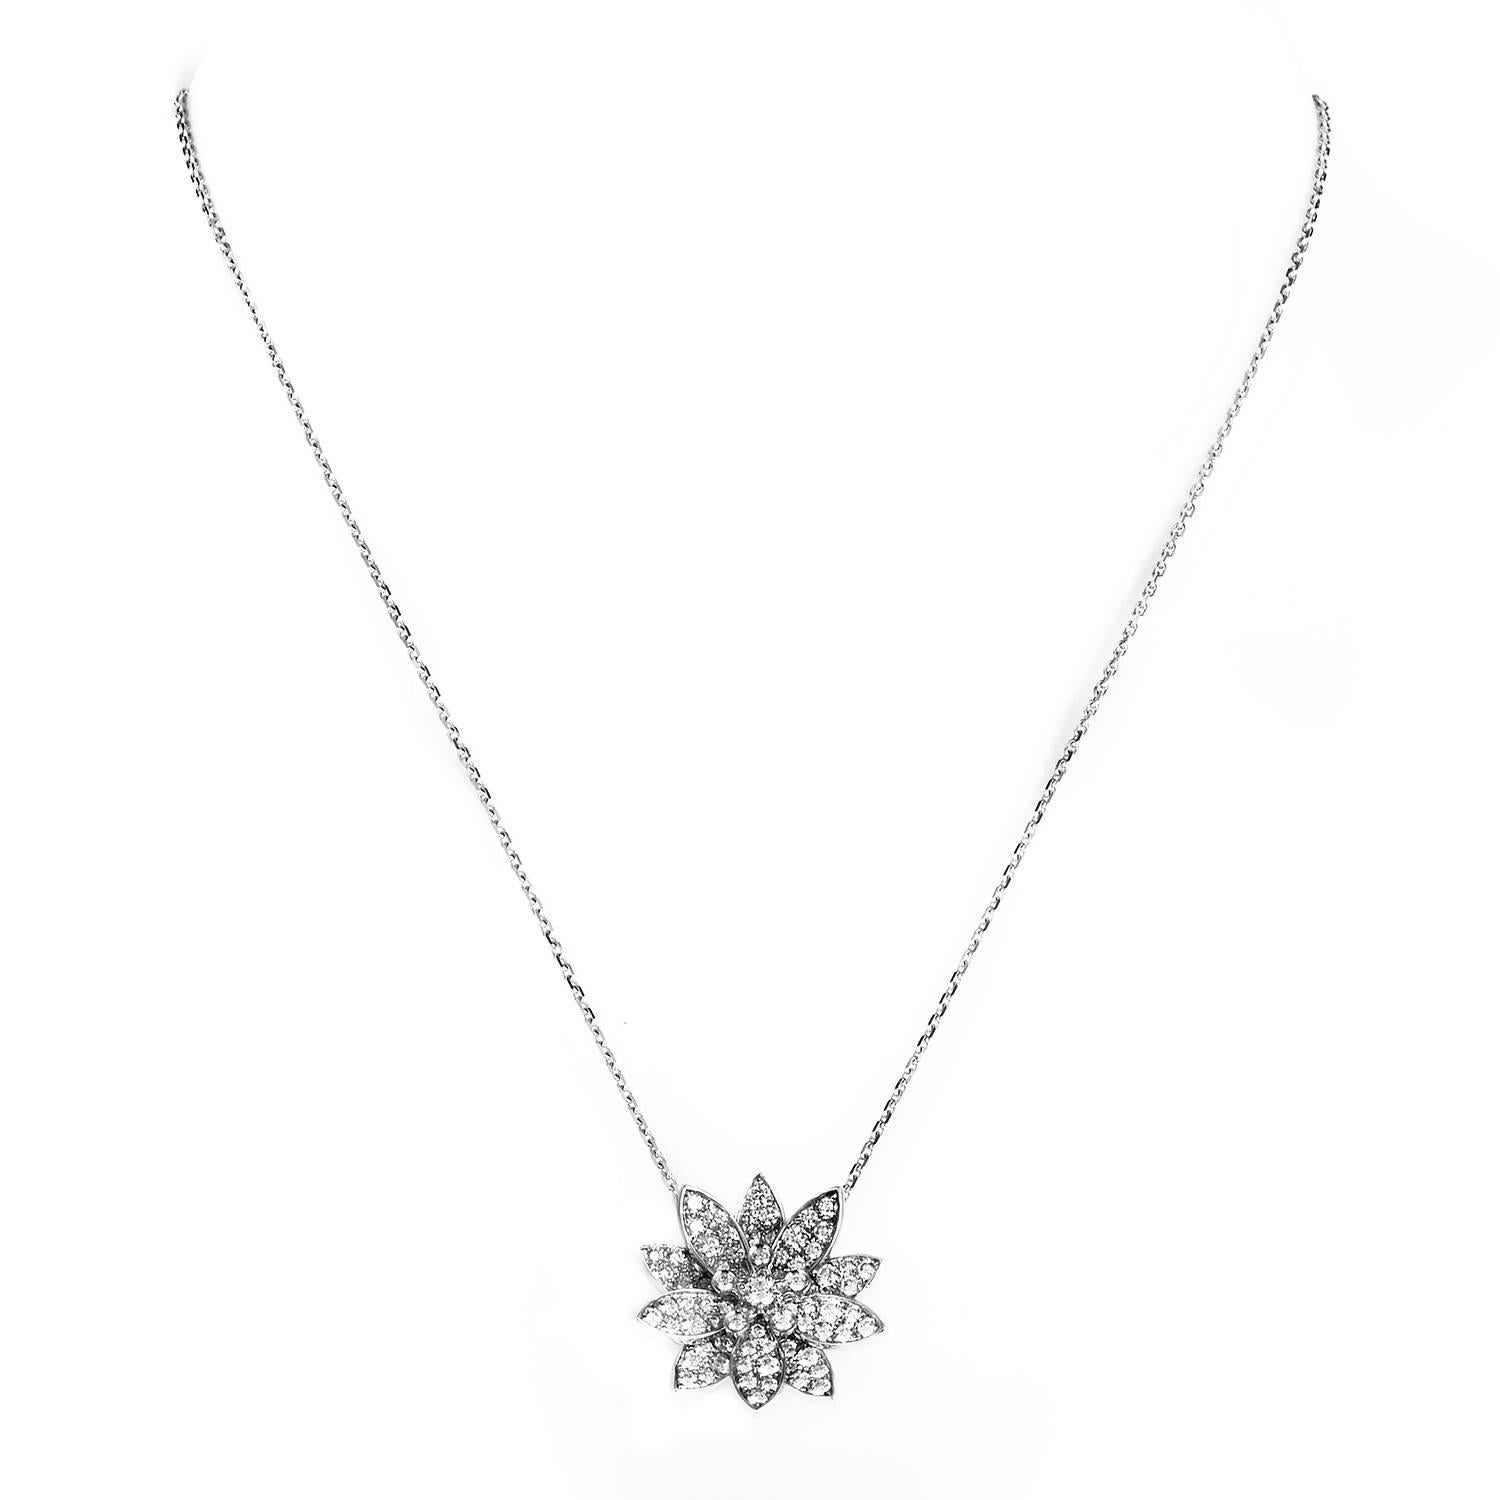 A truly mesmerizing end extraordinary depiction of a lotus flower in a delightfully feminine and luxuriously lavish spirit, the pendant of this astonishing 18K white gold necklace from Van Cleef & Arpels boasts a spellbinding arrangement of